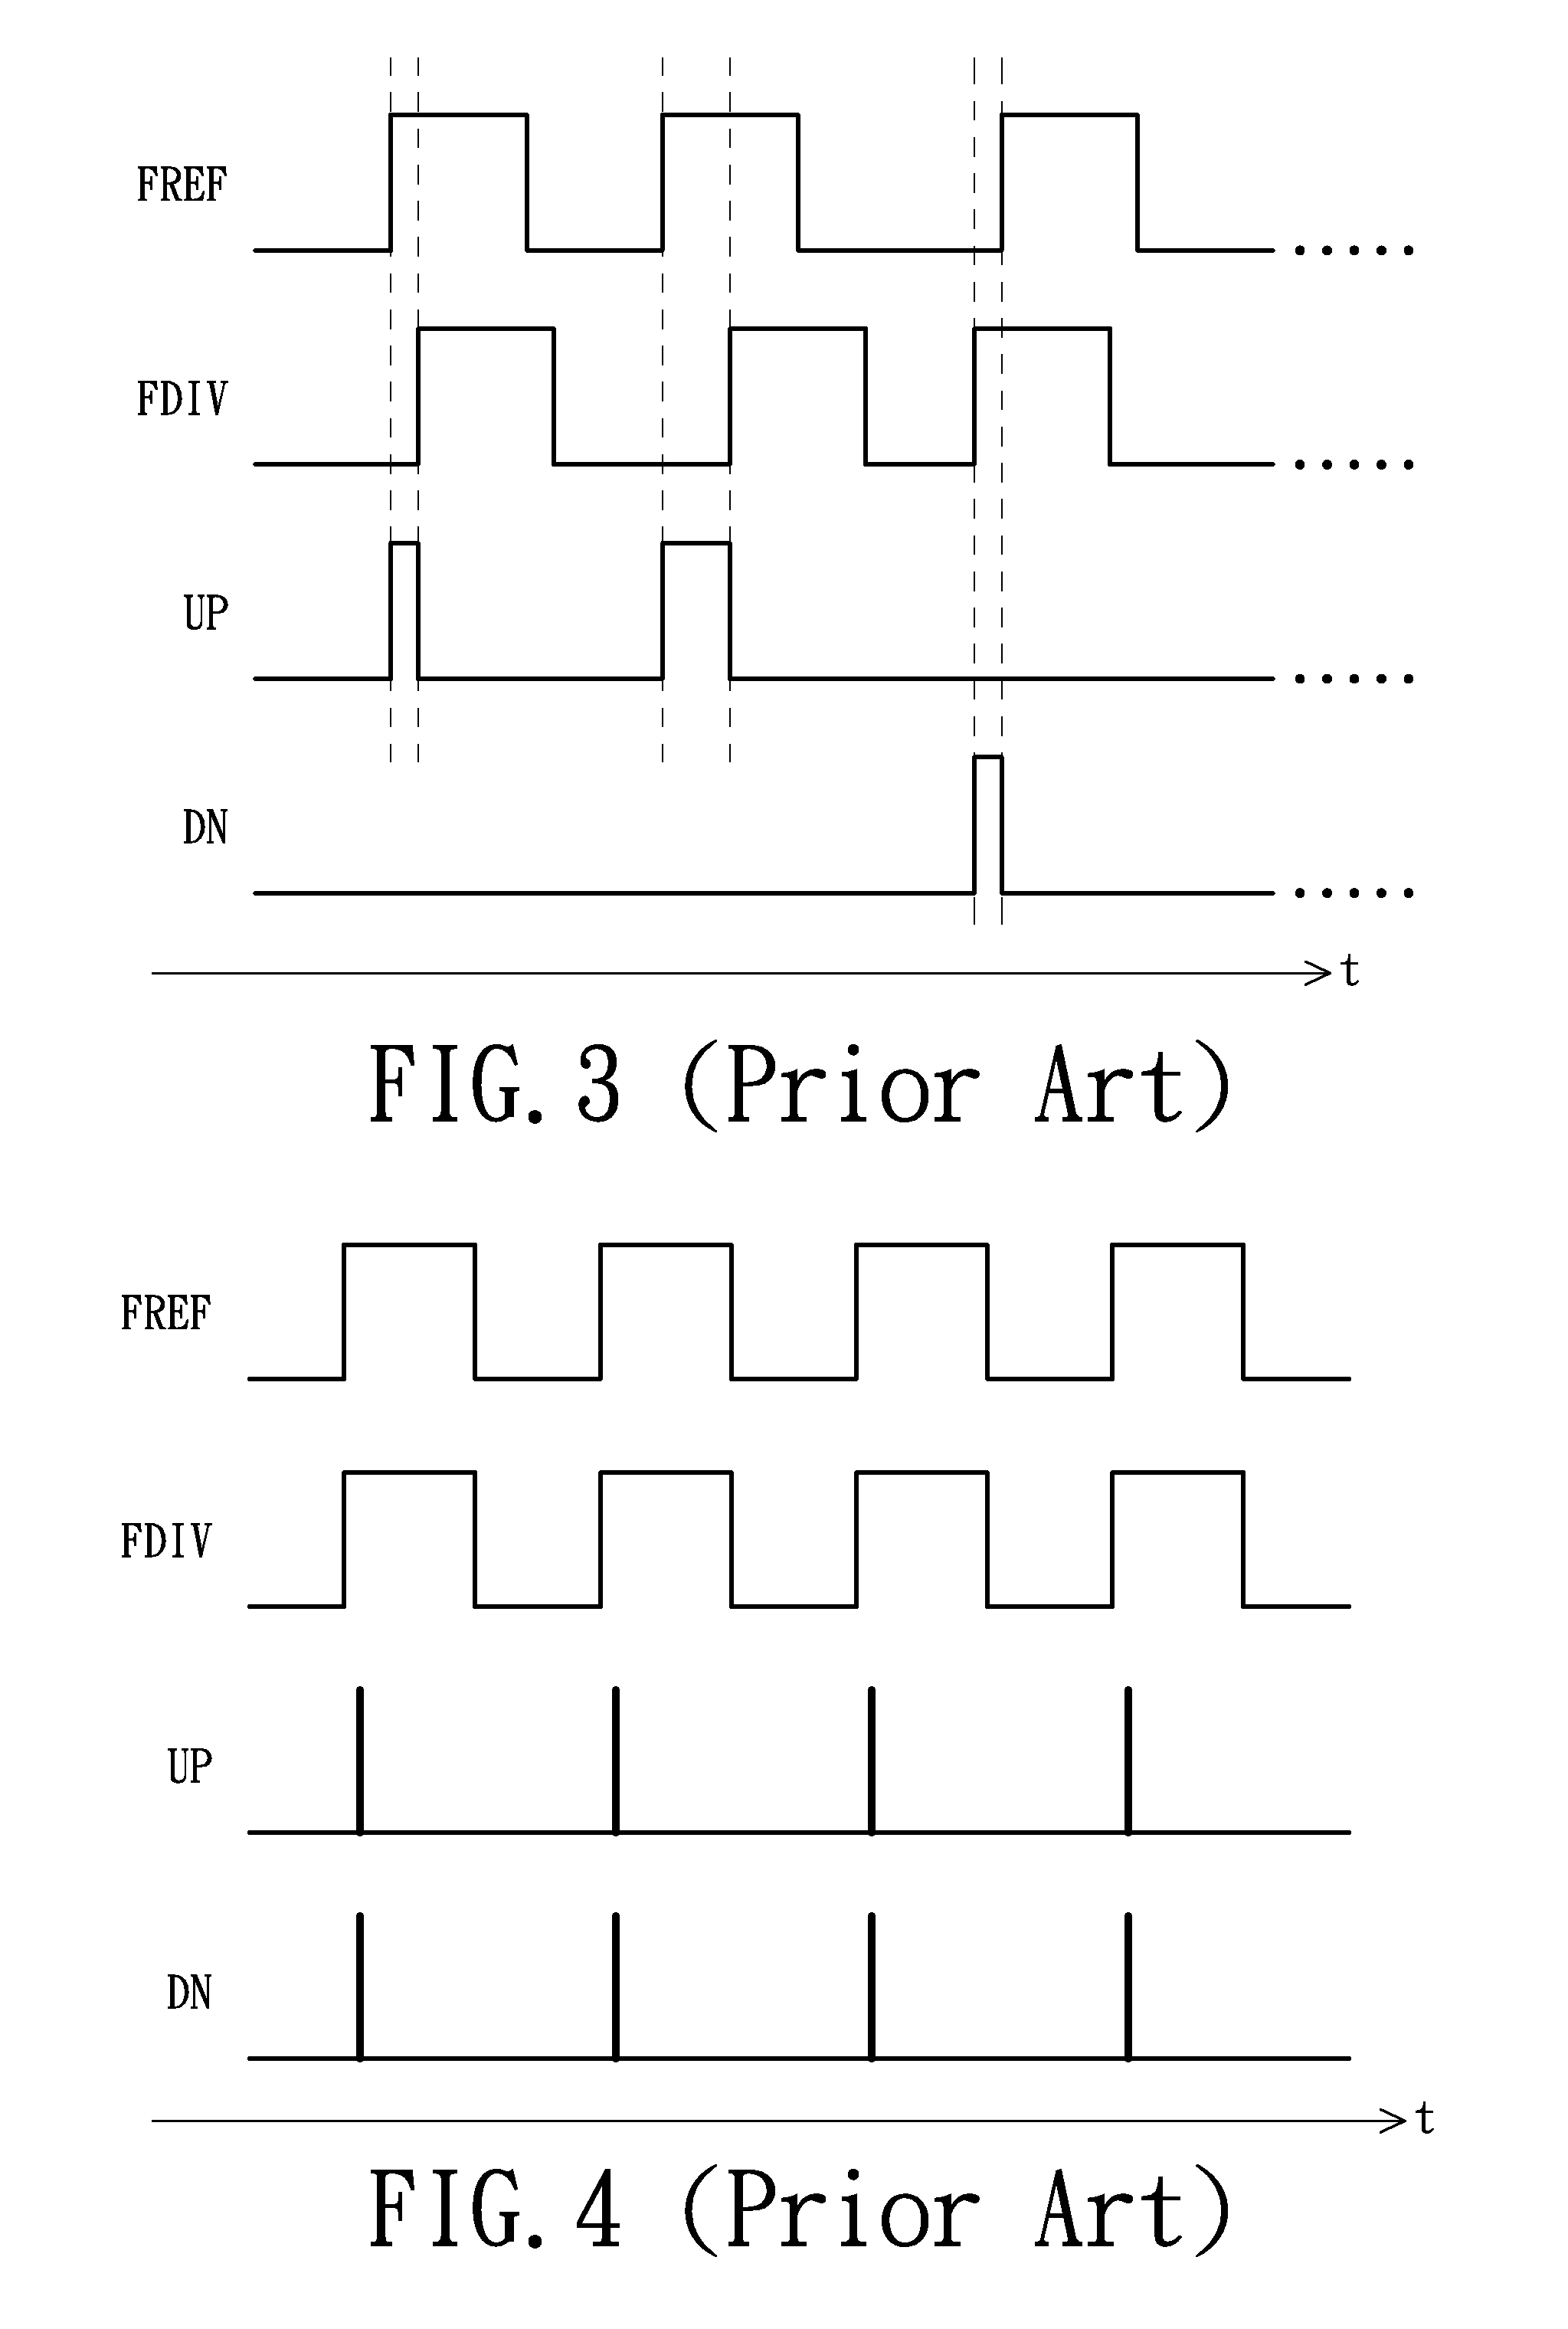 Phase and/or frequency detector, phase-locked loop and operation method for the phase-locked loop